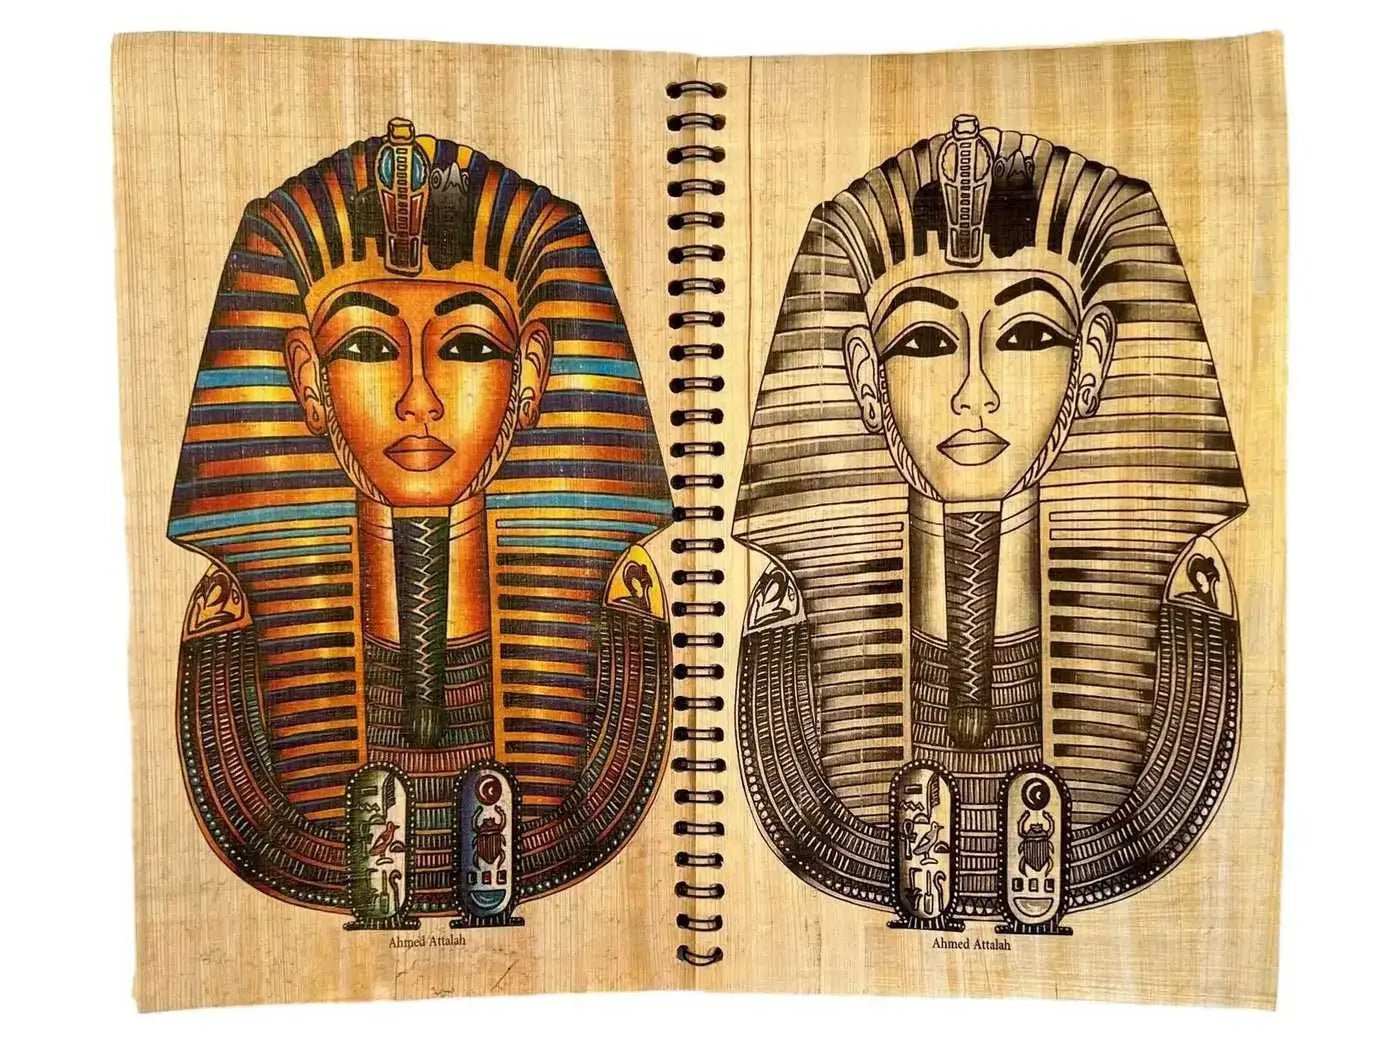 Egyptian Blank Papyrus Paper Handmade Paper Sheets - Set of 20 for  Scrapbooking, Art Projects, Schools, Teaching Ancient Egypt Hieroglyphics  History